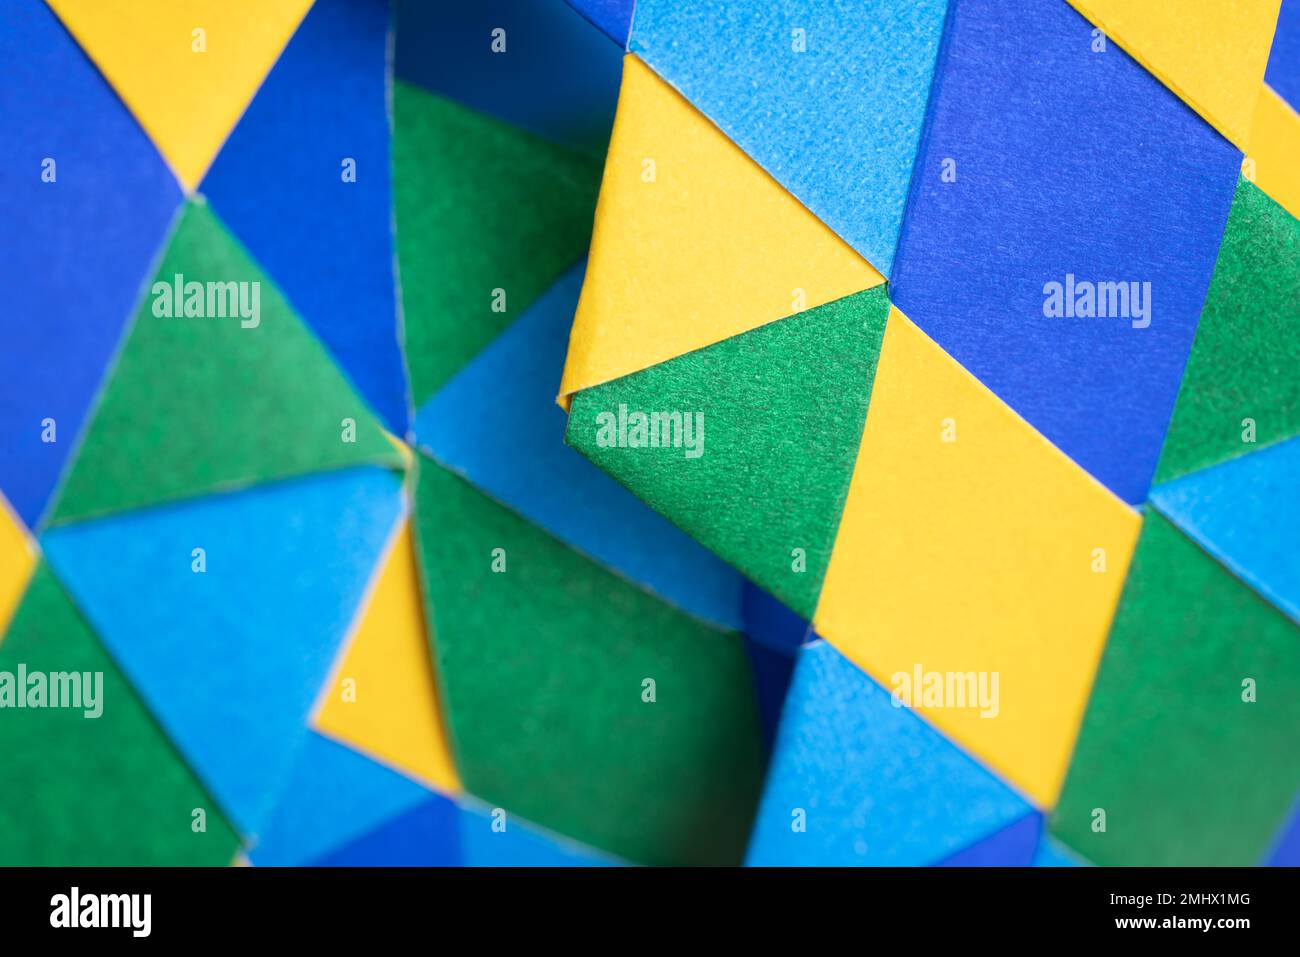 Background abstract geometric design triangle vivid color blue yellow and green weave element wallpaper graphic pattern.Modern fashion style website b Stock Photo